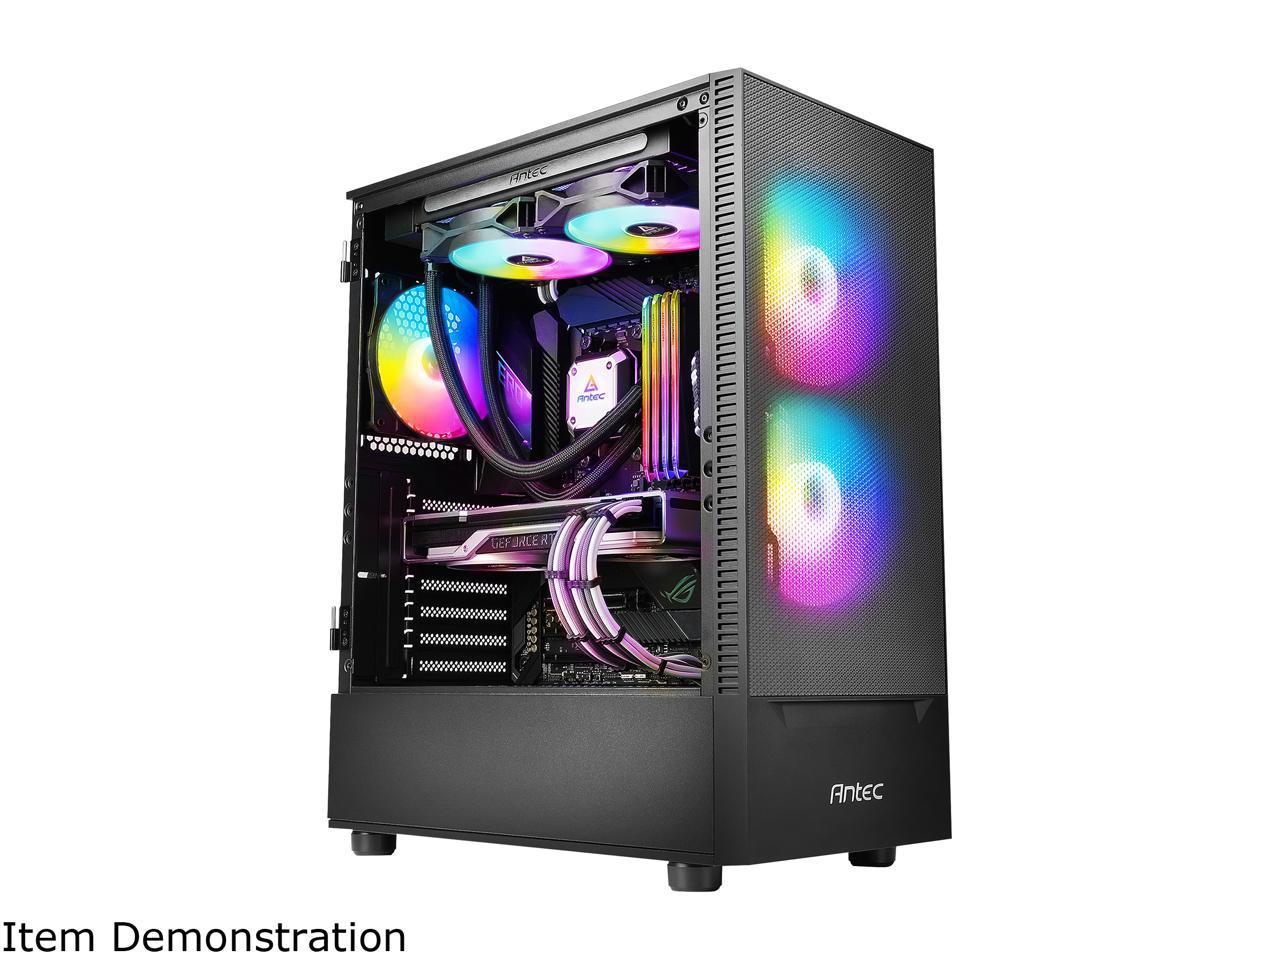 Antec NX Series NX410, 2 x 140mm & 1 x 120mm ARGB Fans Included, 360mm Radiator Support, Mesh Front Panel & Swing-Open Tempered Glass Side Panel ATX Mid-Tower Gaming Case - image 1 of 14